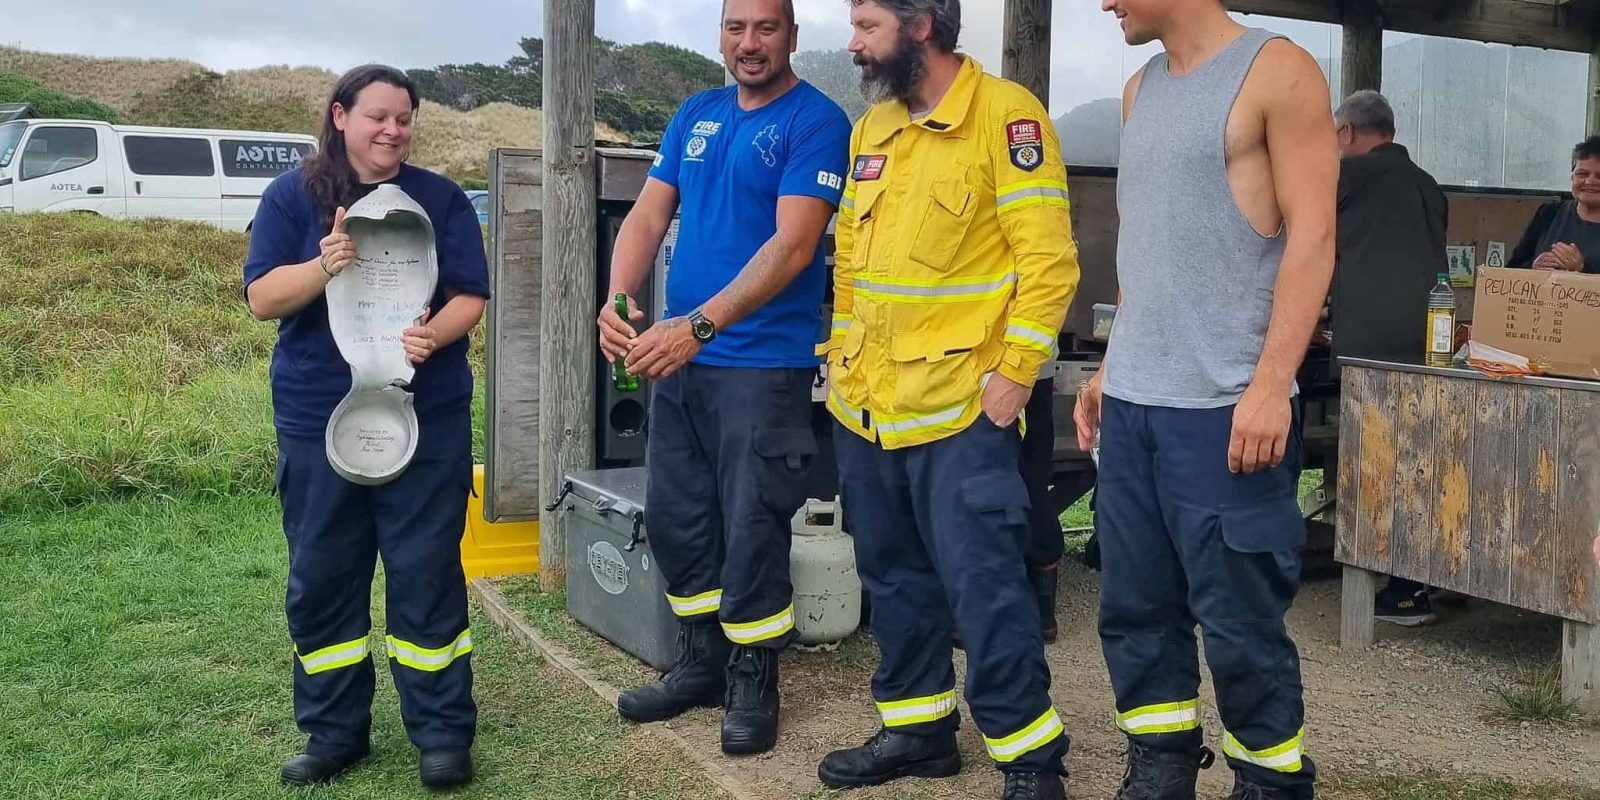 Tryphena 2 Takes the Trophy! Their cool heads and disciplined approach earned them the top spot in the Great Barrier Island fire crew time trial. Photo / Leanne Sanderson via Barrier Bulletin